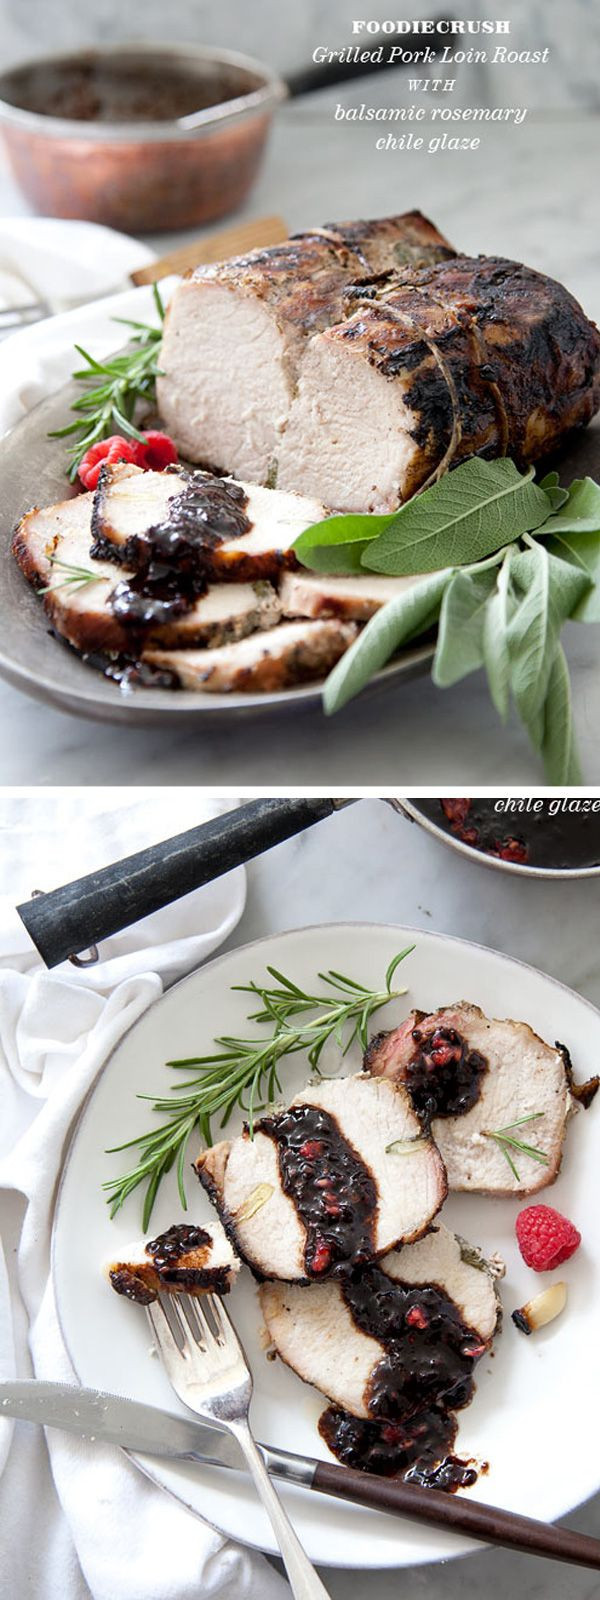 Grilled Pork Loin Roast Recipes
 Grilled Pork Loin Roast with Balsamic and Raspberry Chili